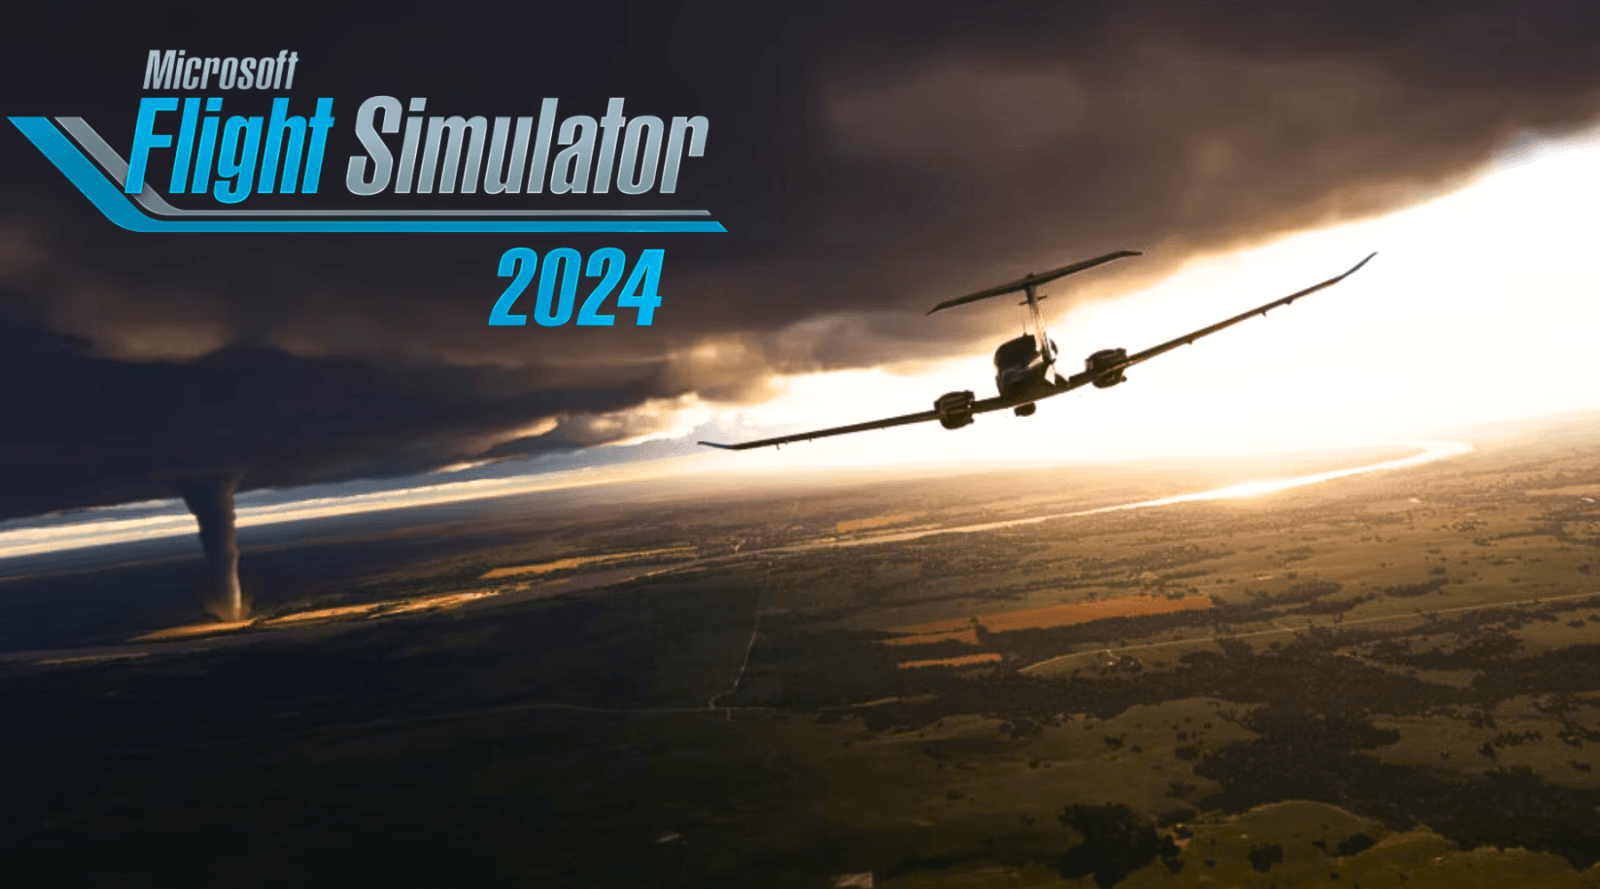 Microsoft Flight Simulator 2024 announced, but will they continue the  10-year support plan for MSFS 2020?